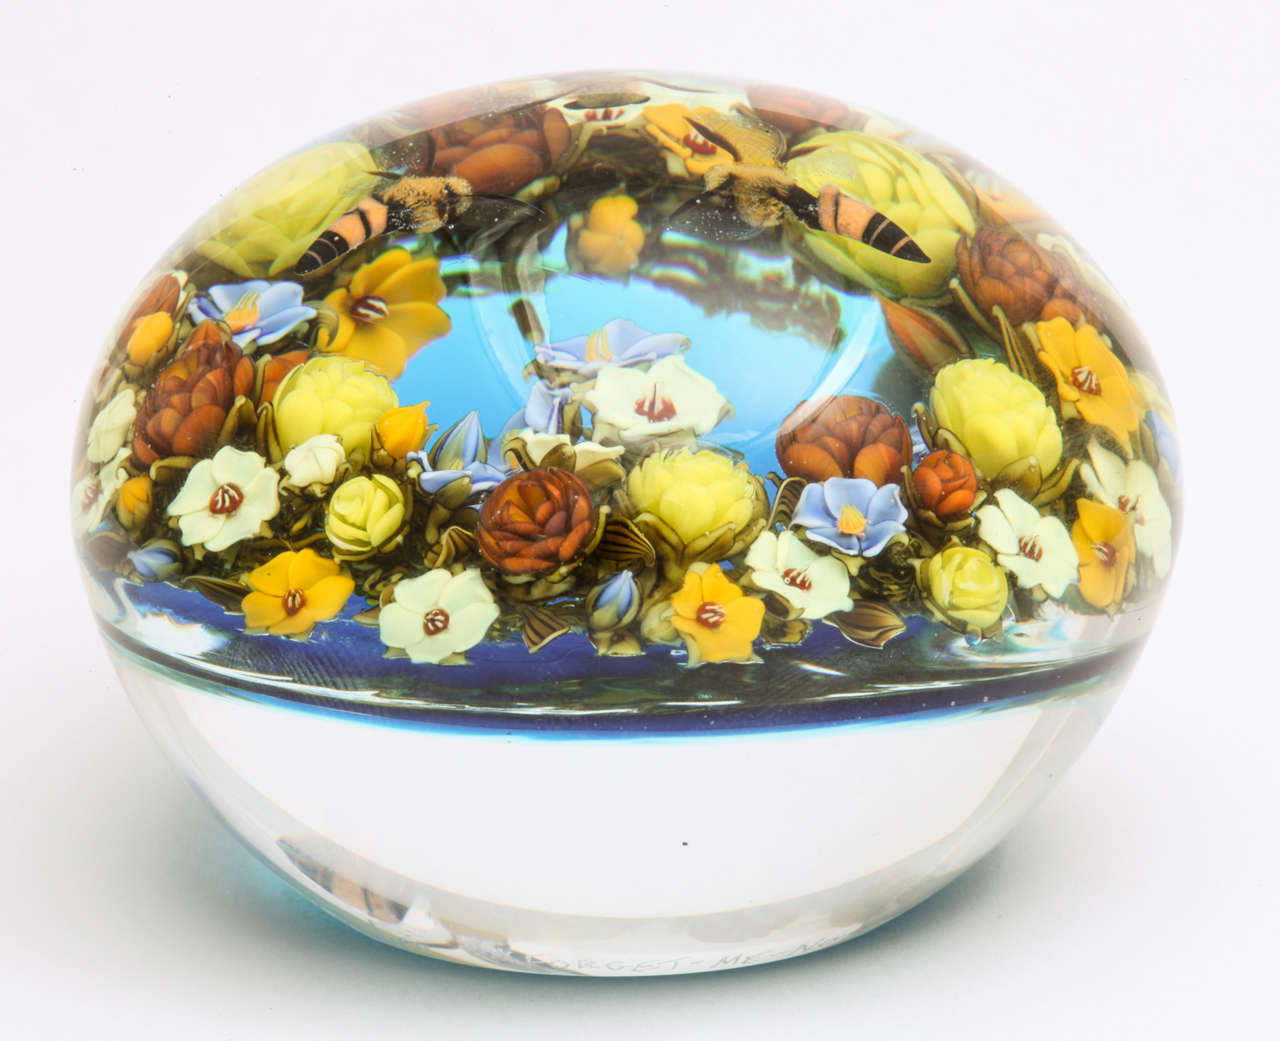 A beautiful David Graeber wreath bouquet paperweight with a bouquet of yellow and blue forget-me-nots and yellow roses around three central flowers and three hovering honeybees all on a translucent blue ground